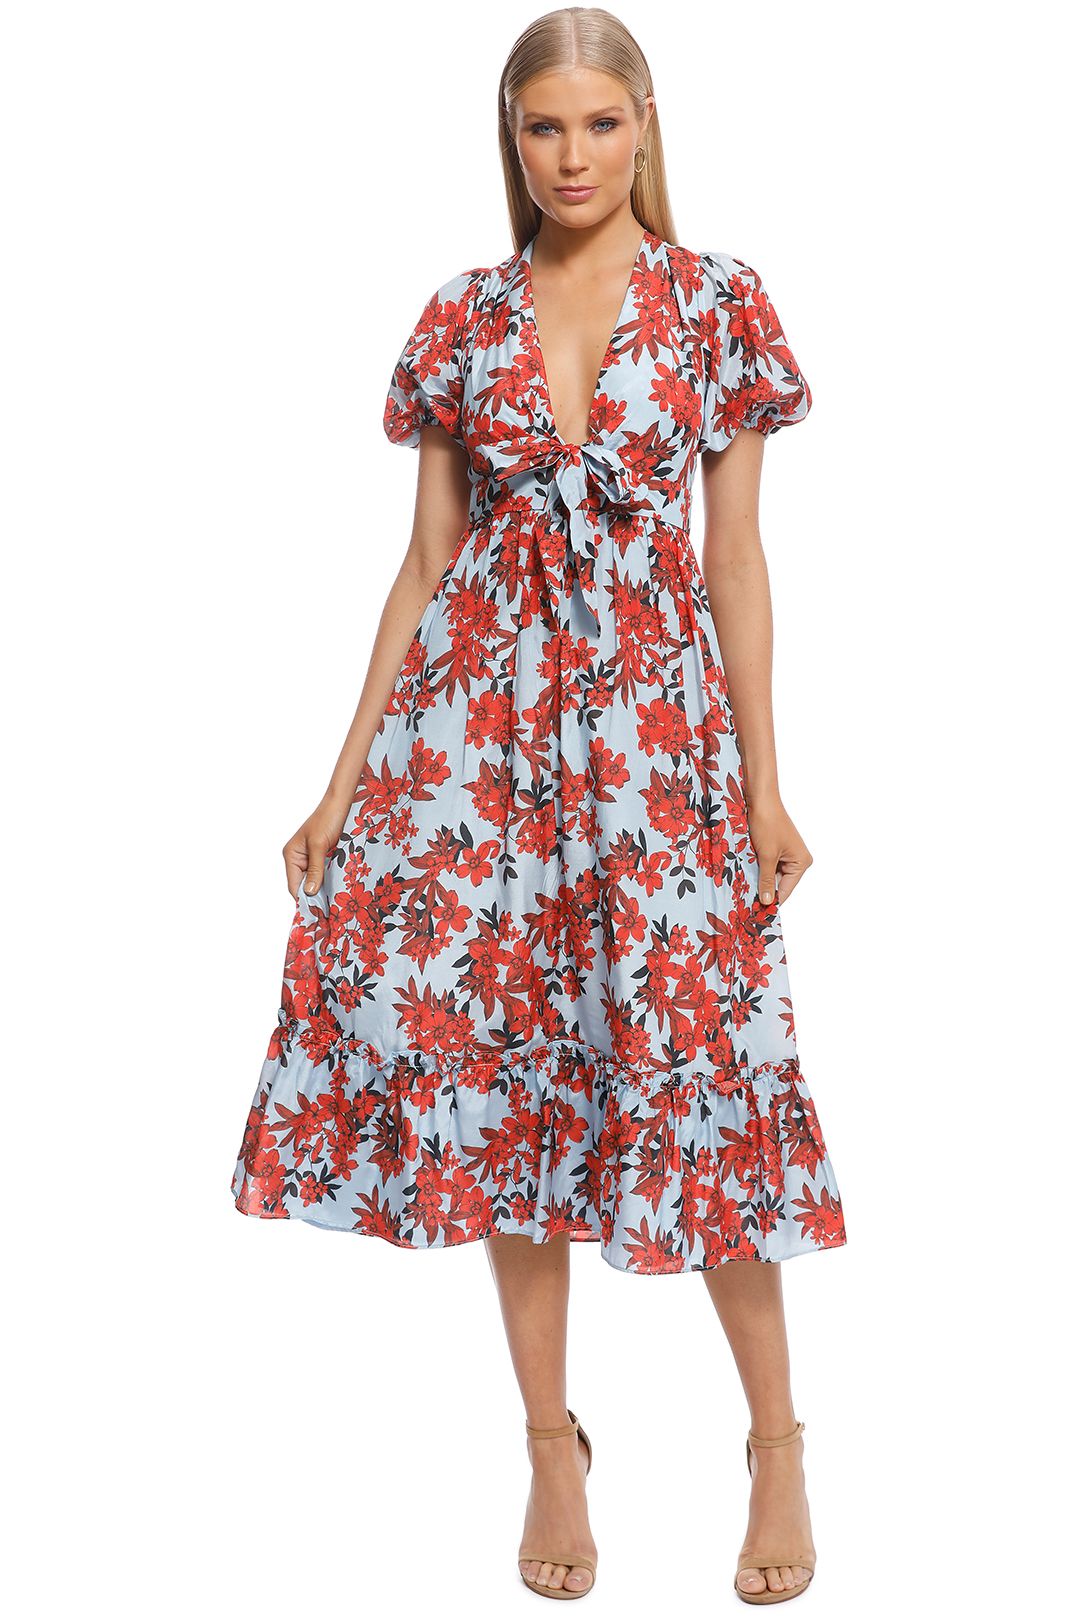 Red Sea Midi Dress by Talulah for Hire | GlamCorner